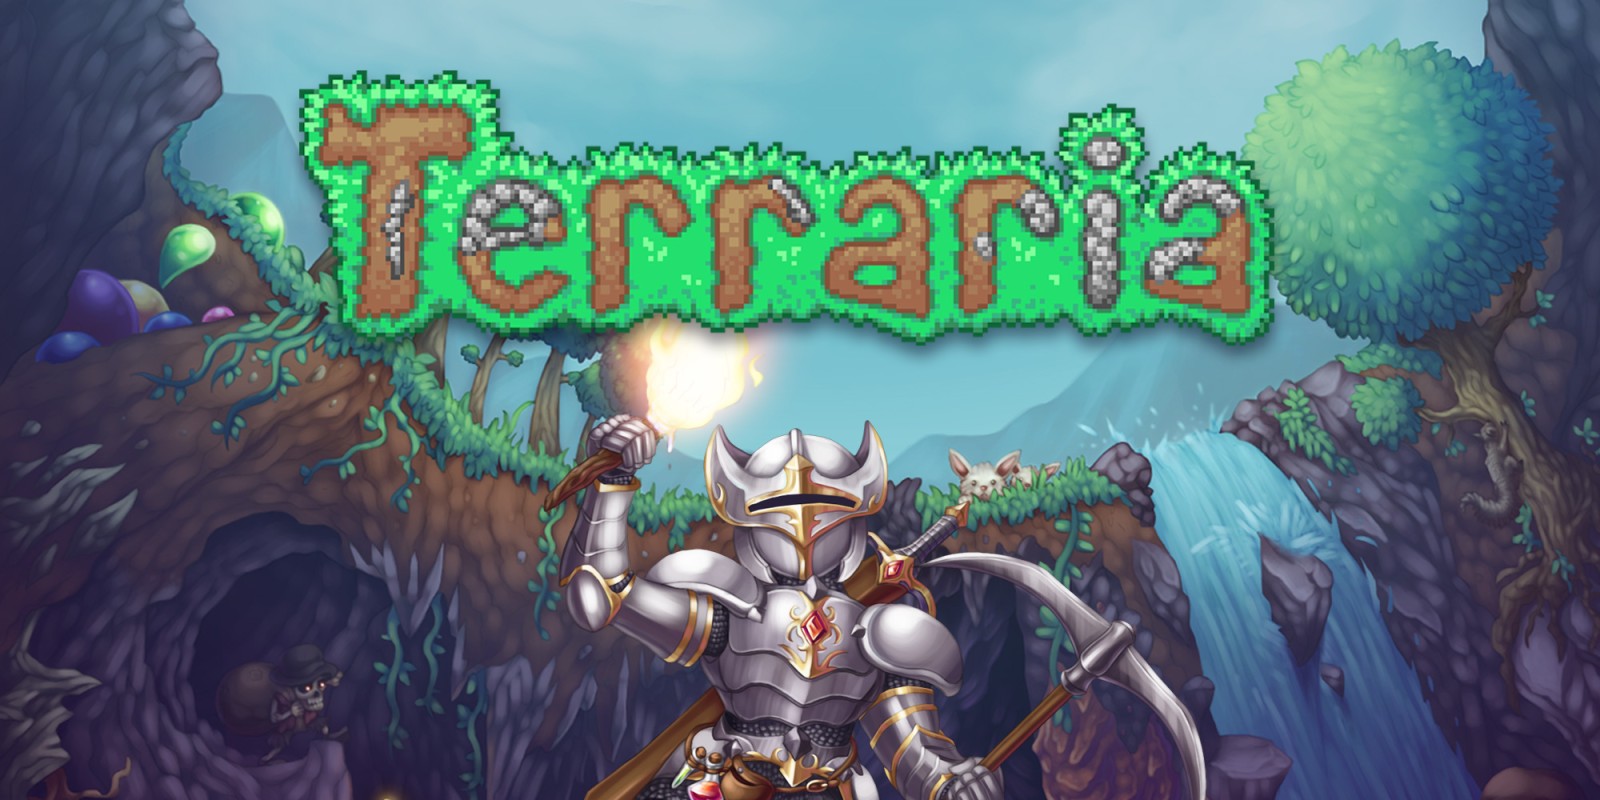 203126-H2x1_NSwitchDS_Terraria_image1600